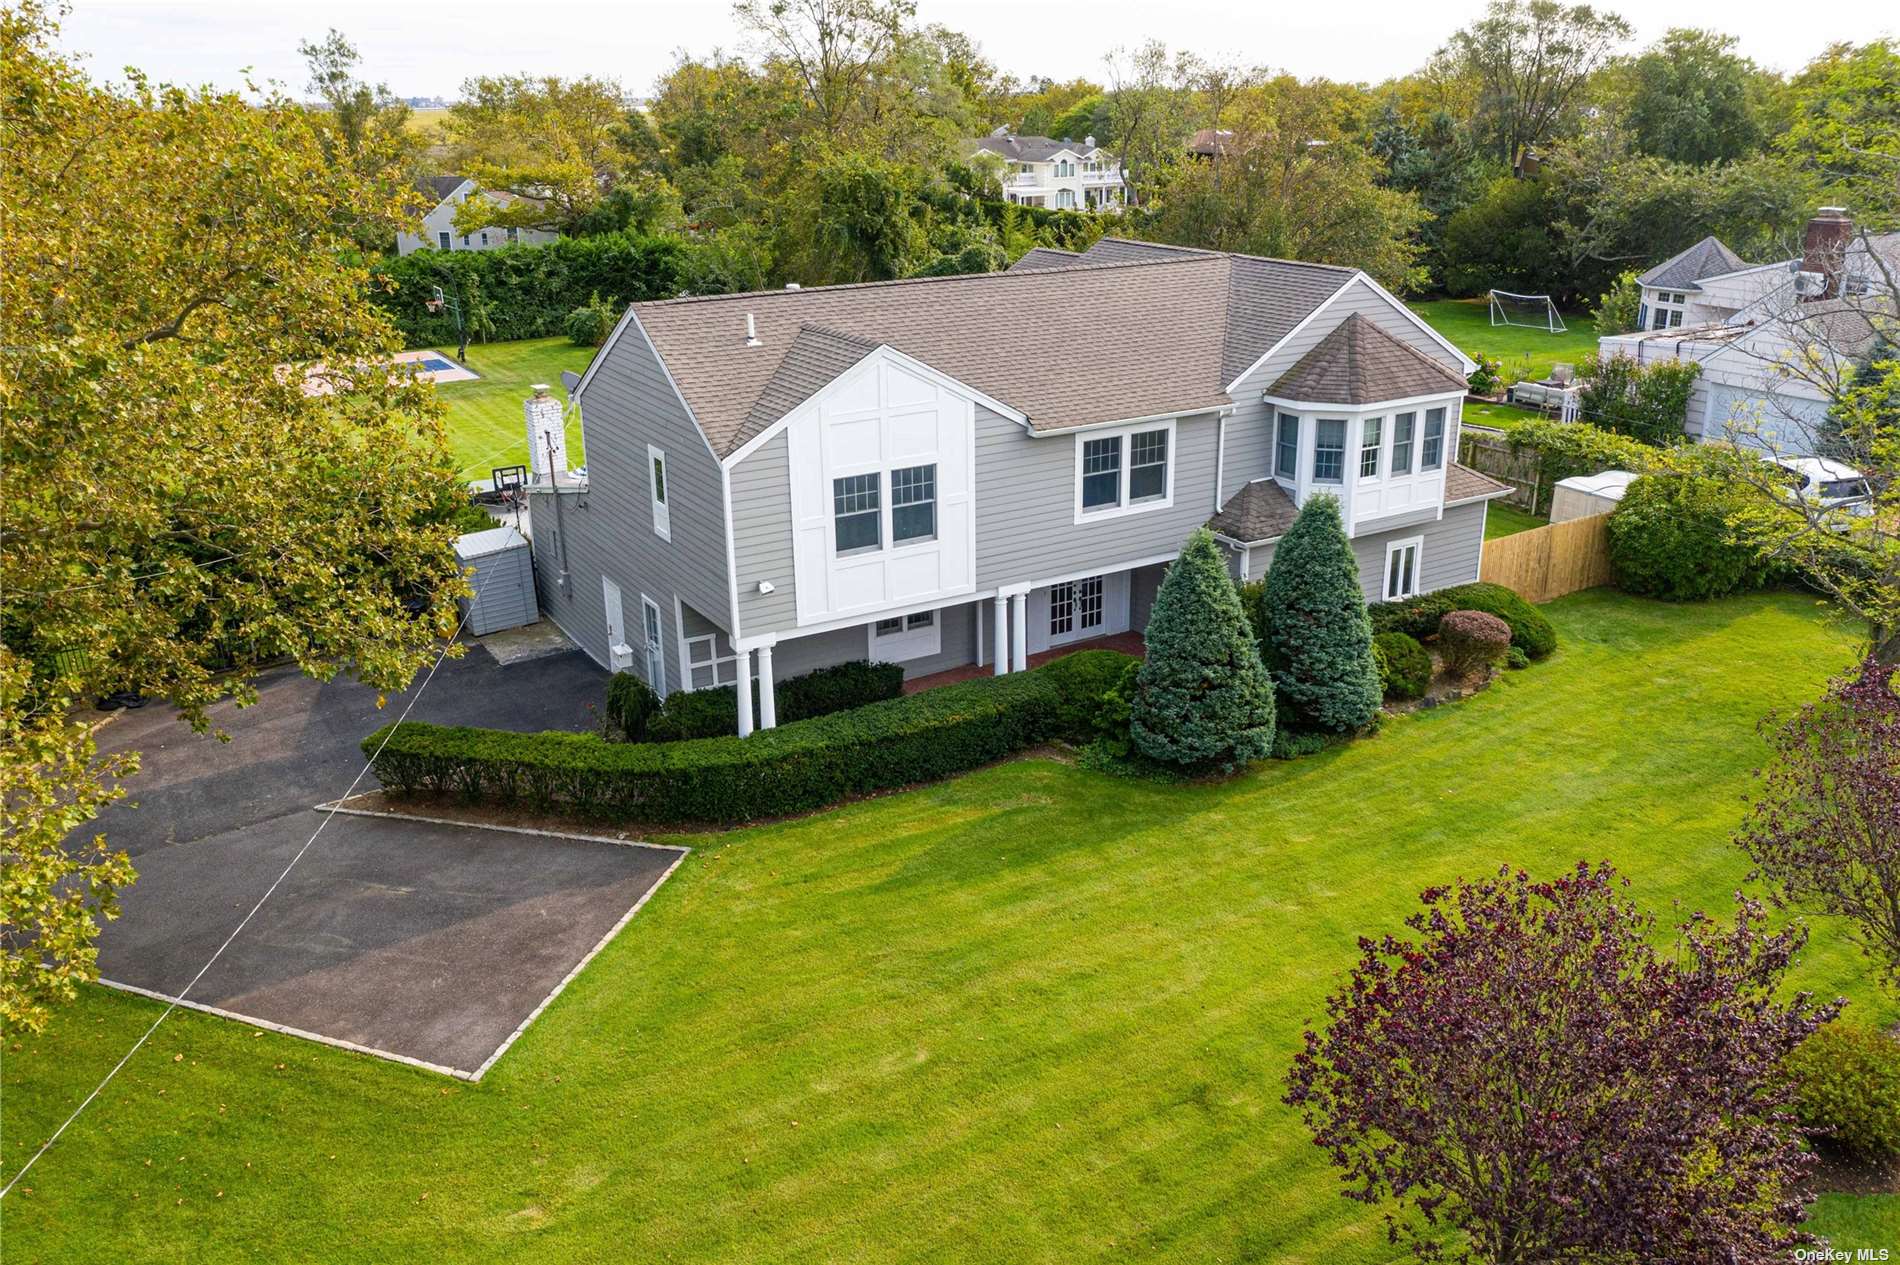 a aerial view of a house with yard and a patio